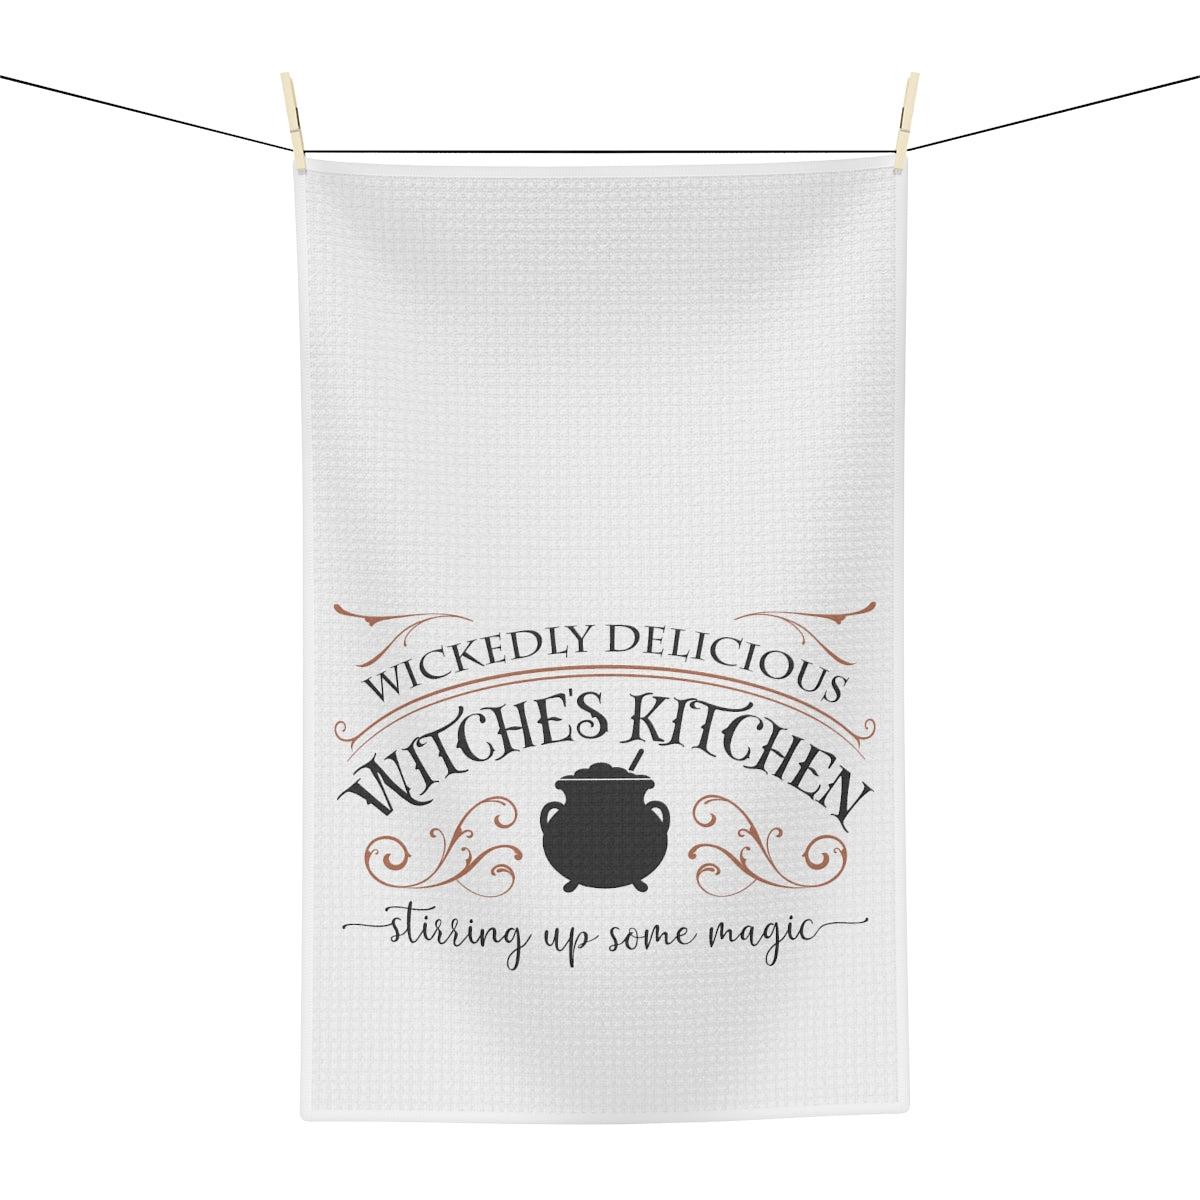 Wickedly Delicious Kitchen Tea Towel - Witchy Kitchens